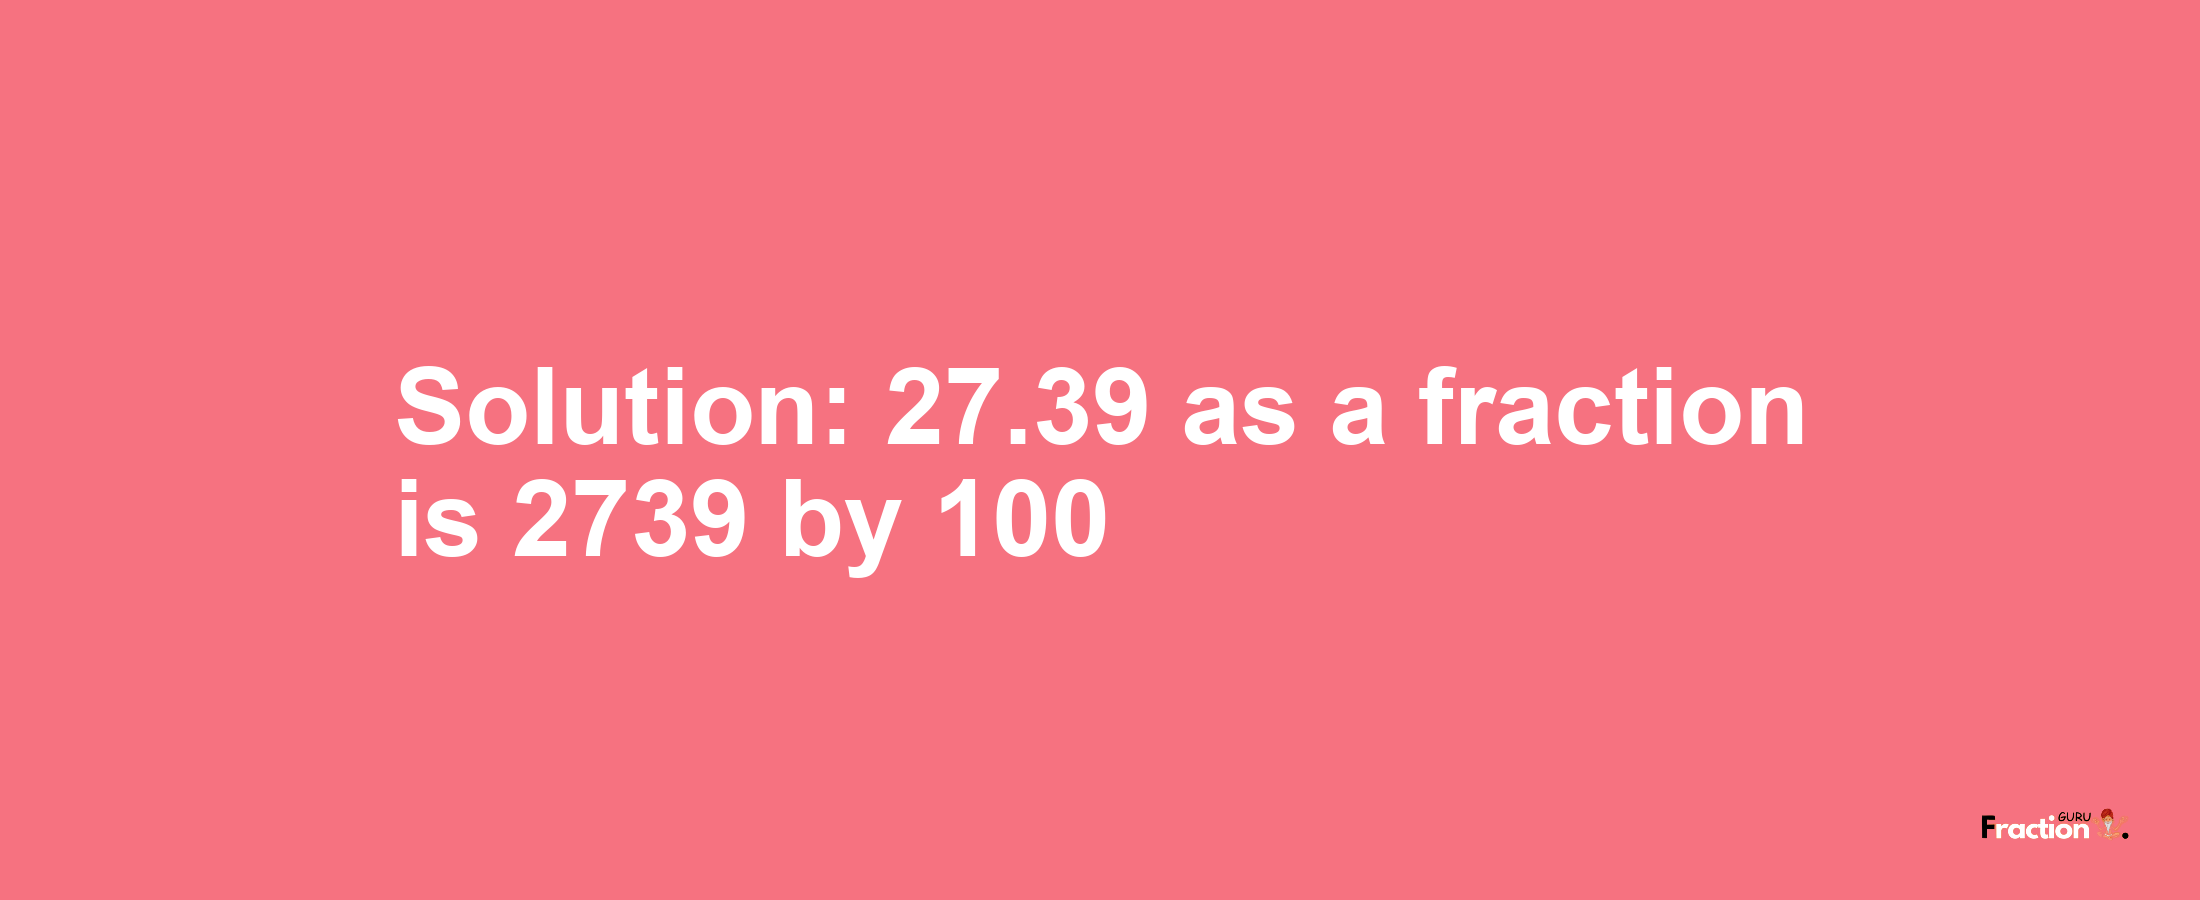 Solution:27.39 as a fraction is 2739/100